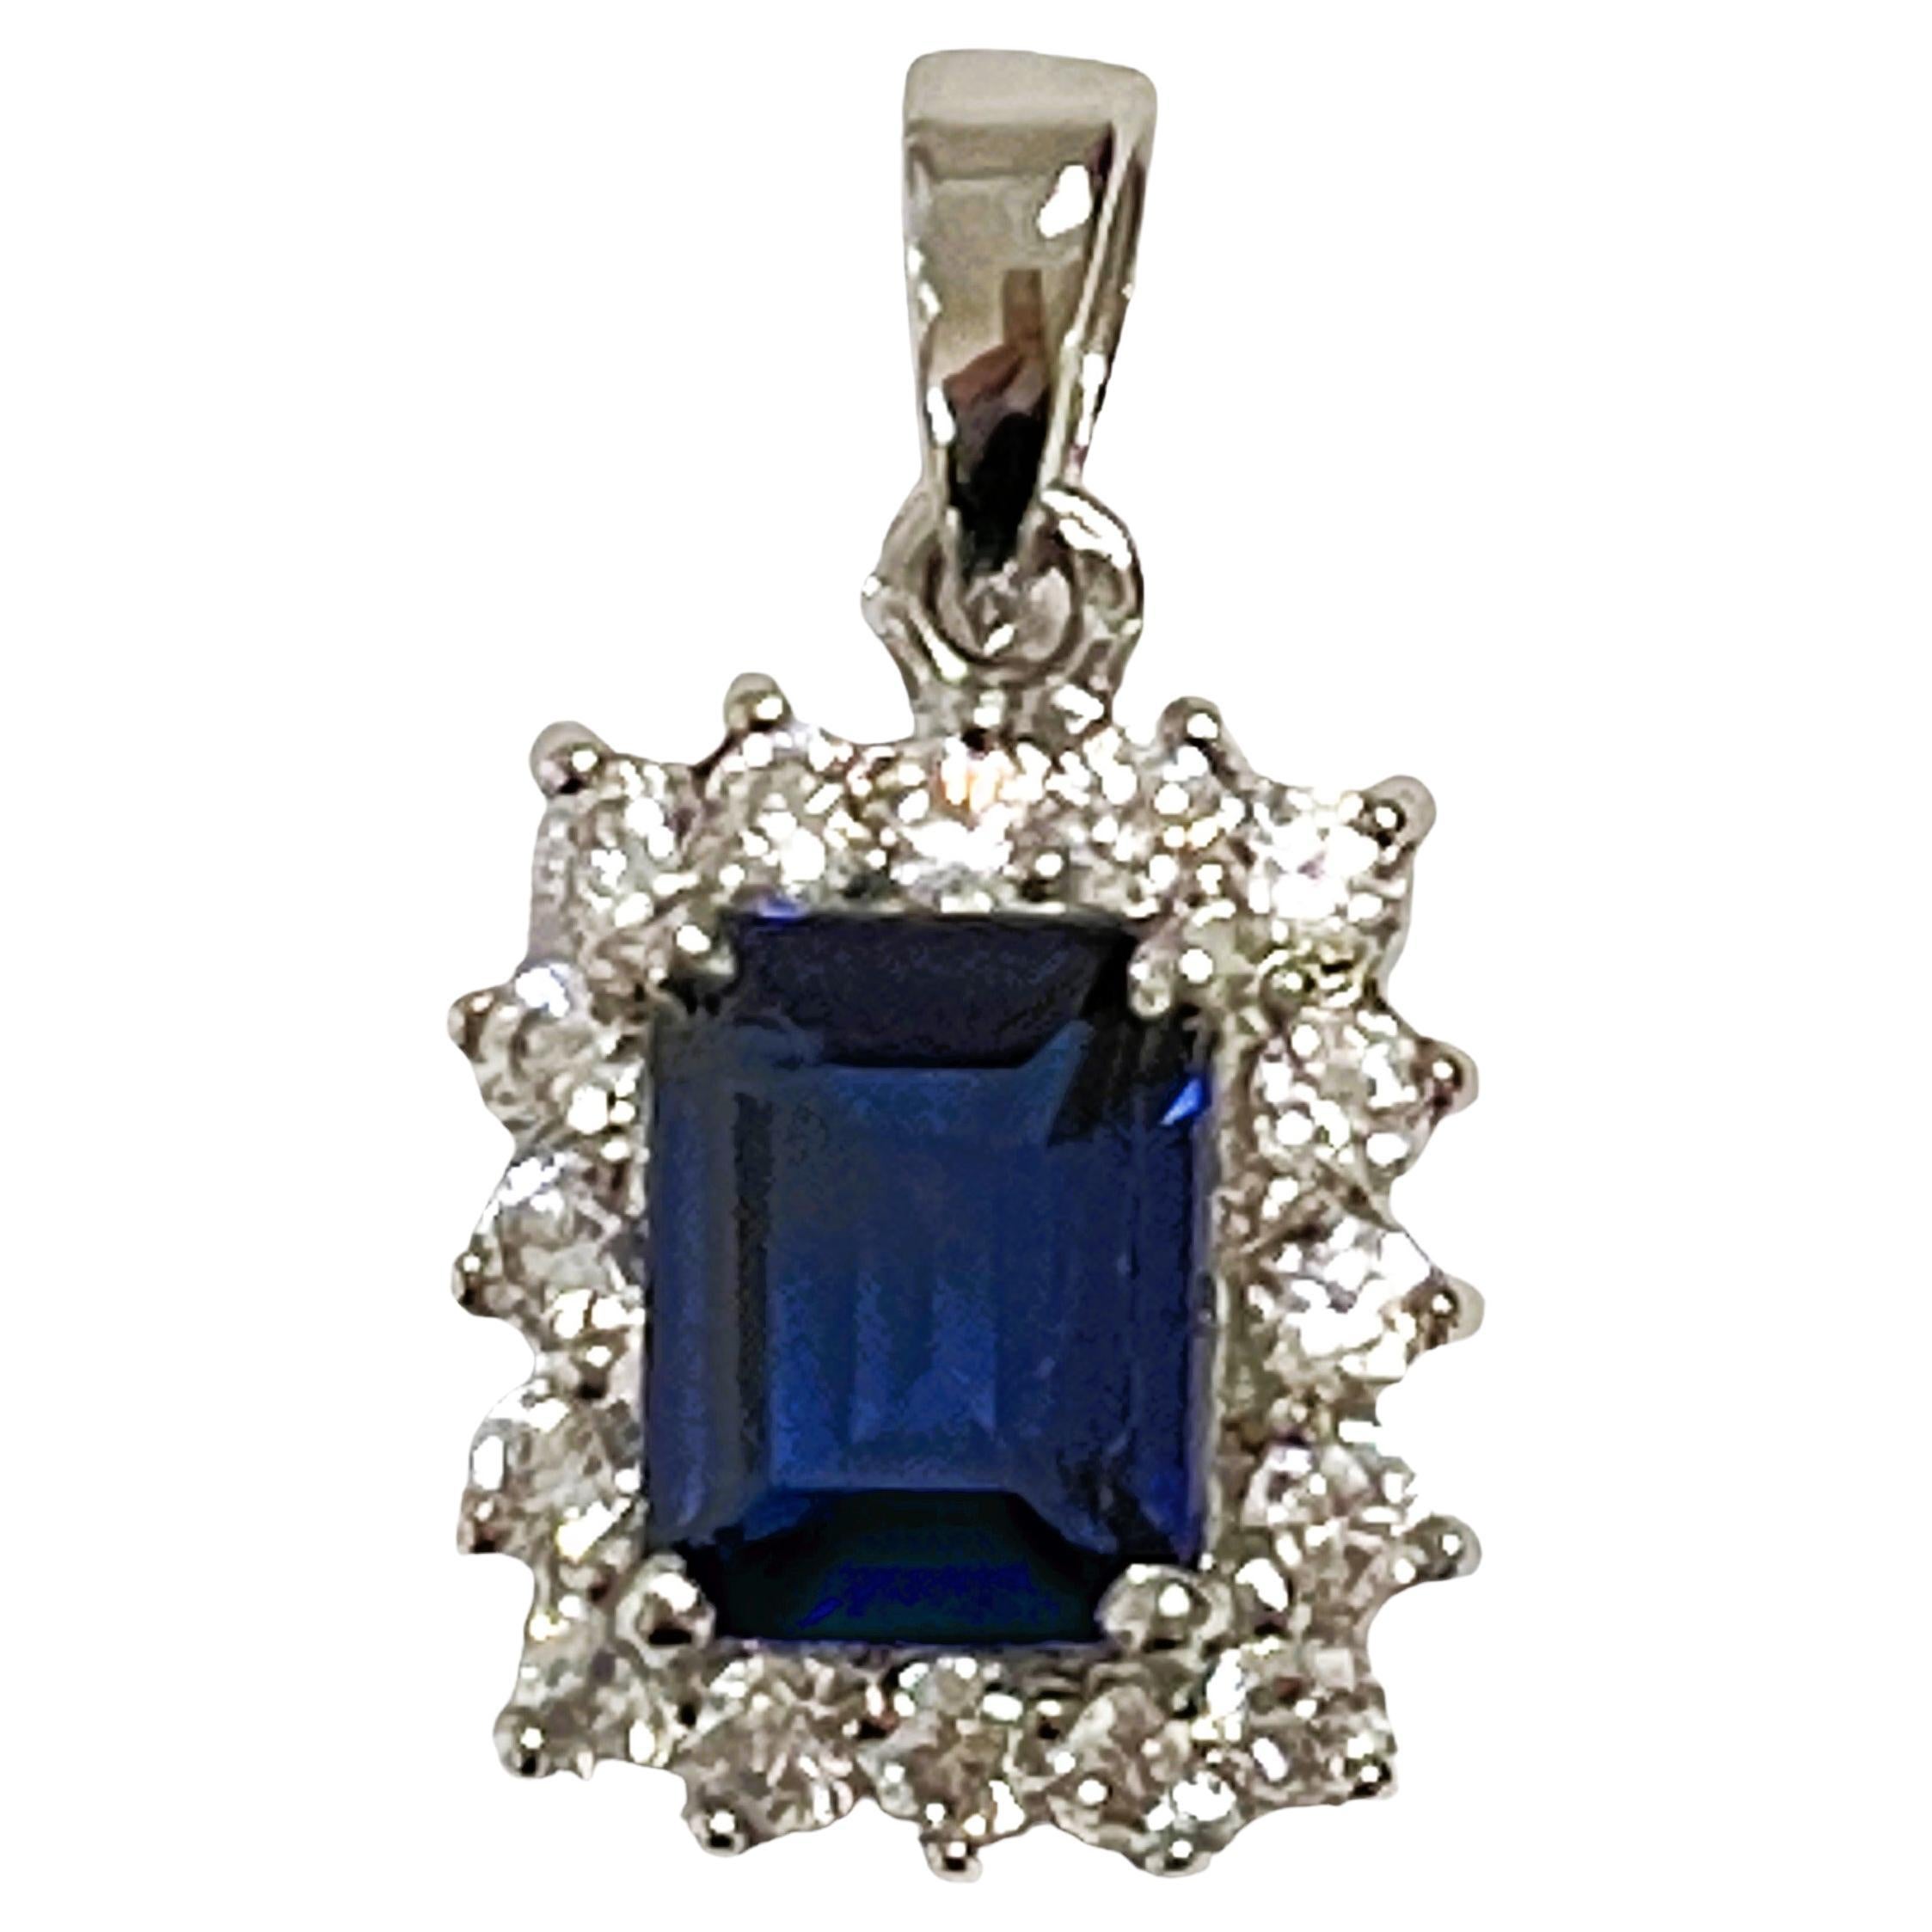 New African IF 2.62ct Kashmir Blue Sapphire & White Sapphire Sterling Pendant